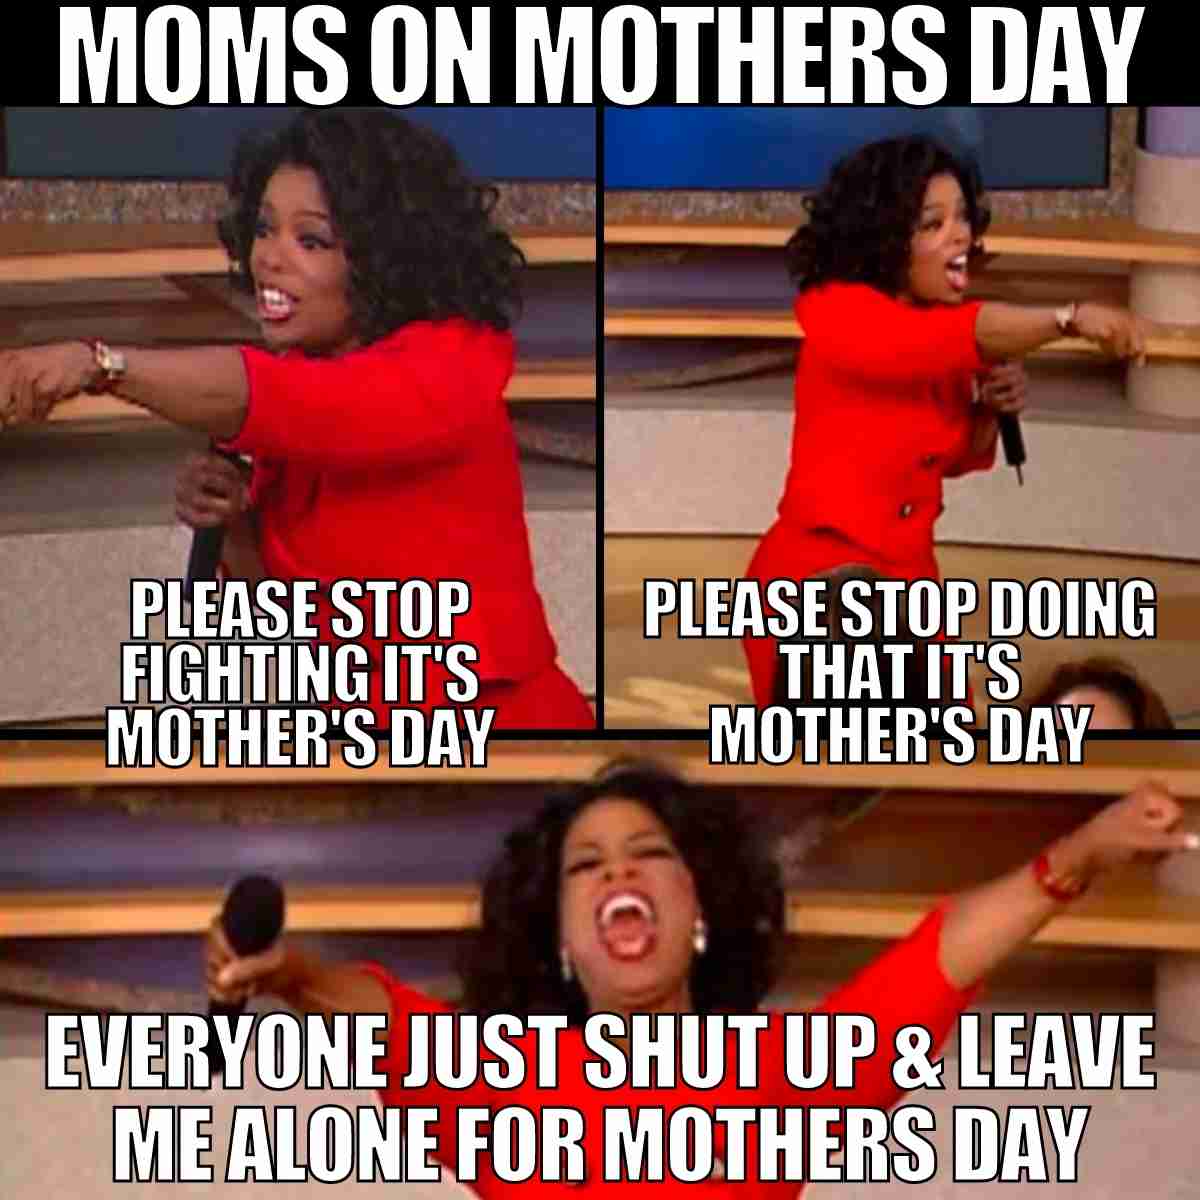 amor abordo recommends naughty mothers day meme pic